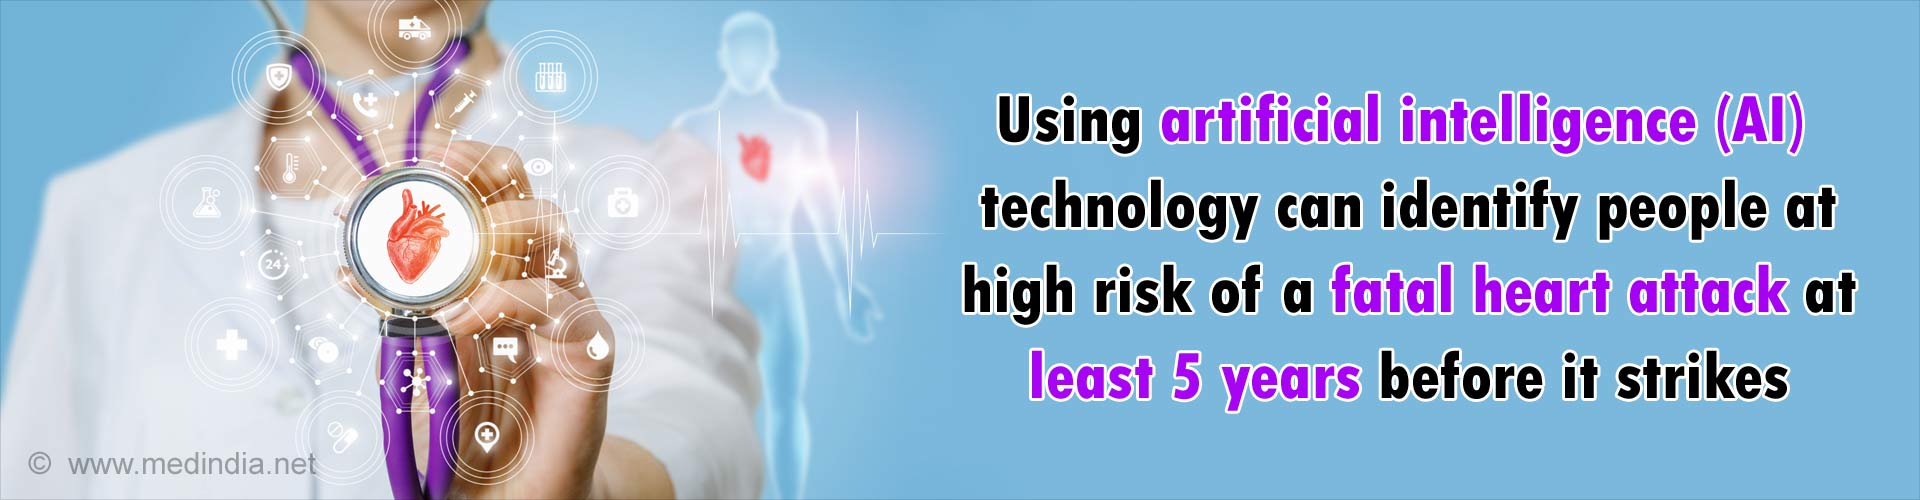 New AI Technology can Detect Heart Attack 5 Years Ahead